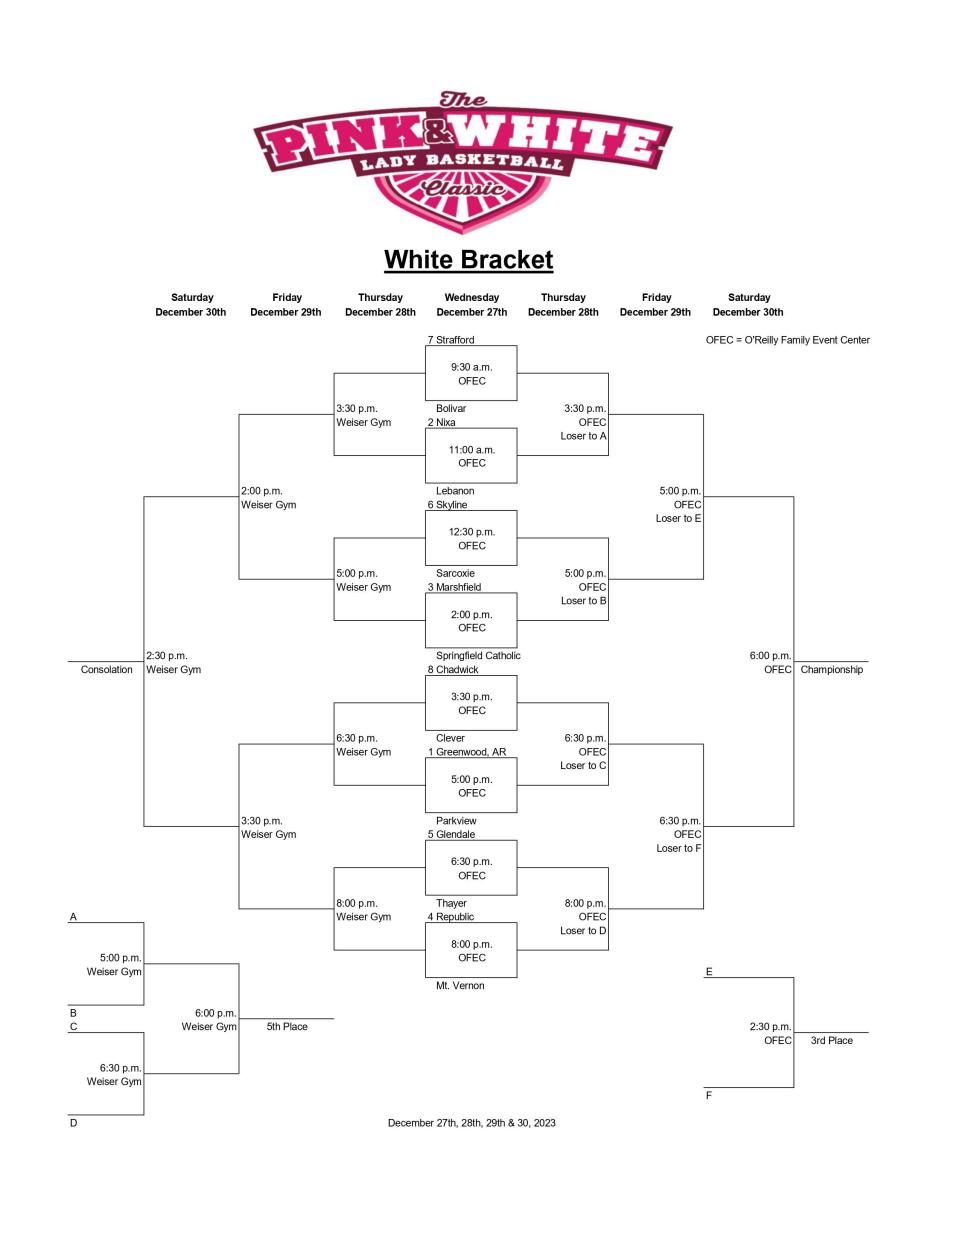 What to know about the 2023 Pink and White Tournament Brackets, top